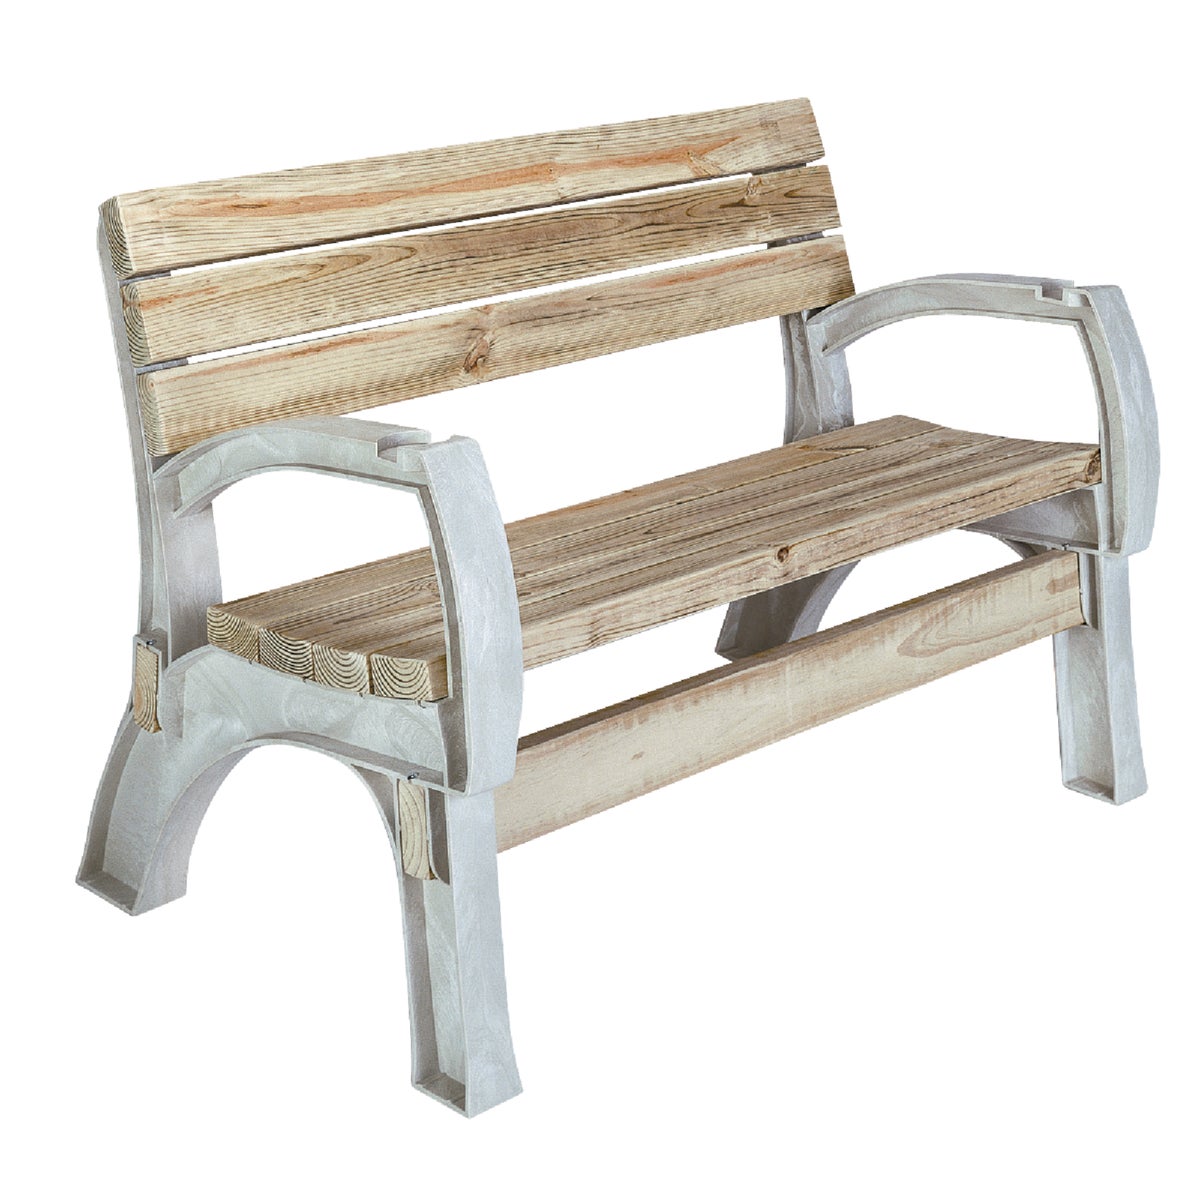 2x4basics AnySize Chair/Bench Ends Kit (lumber not included, only supports) - image 1 of 5